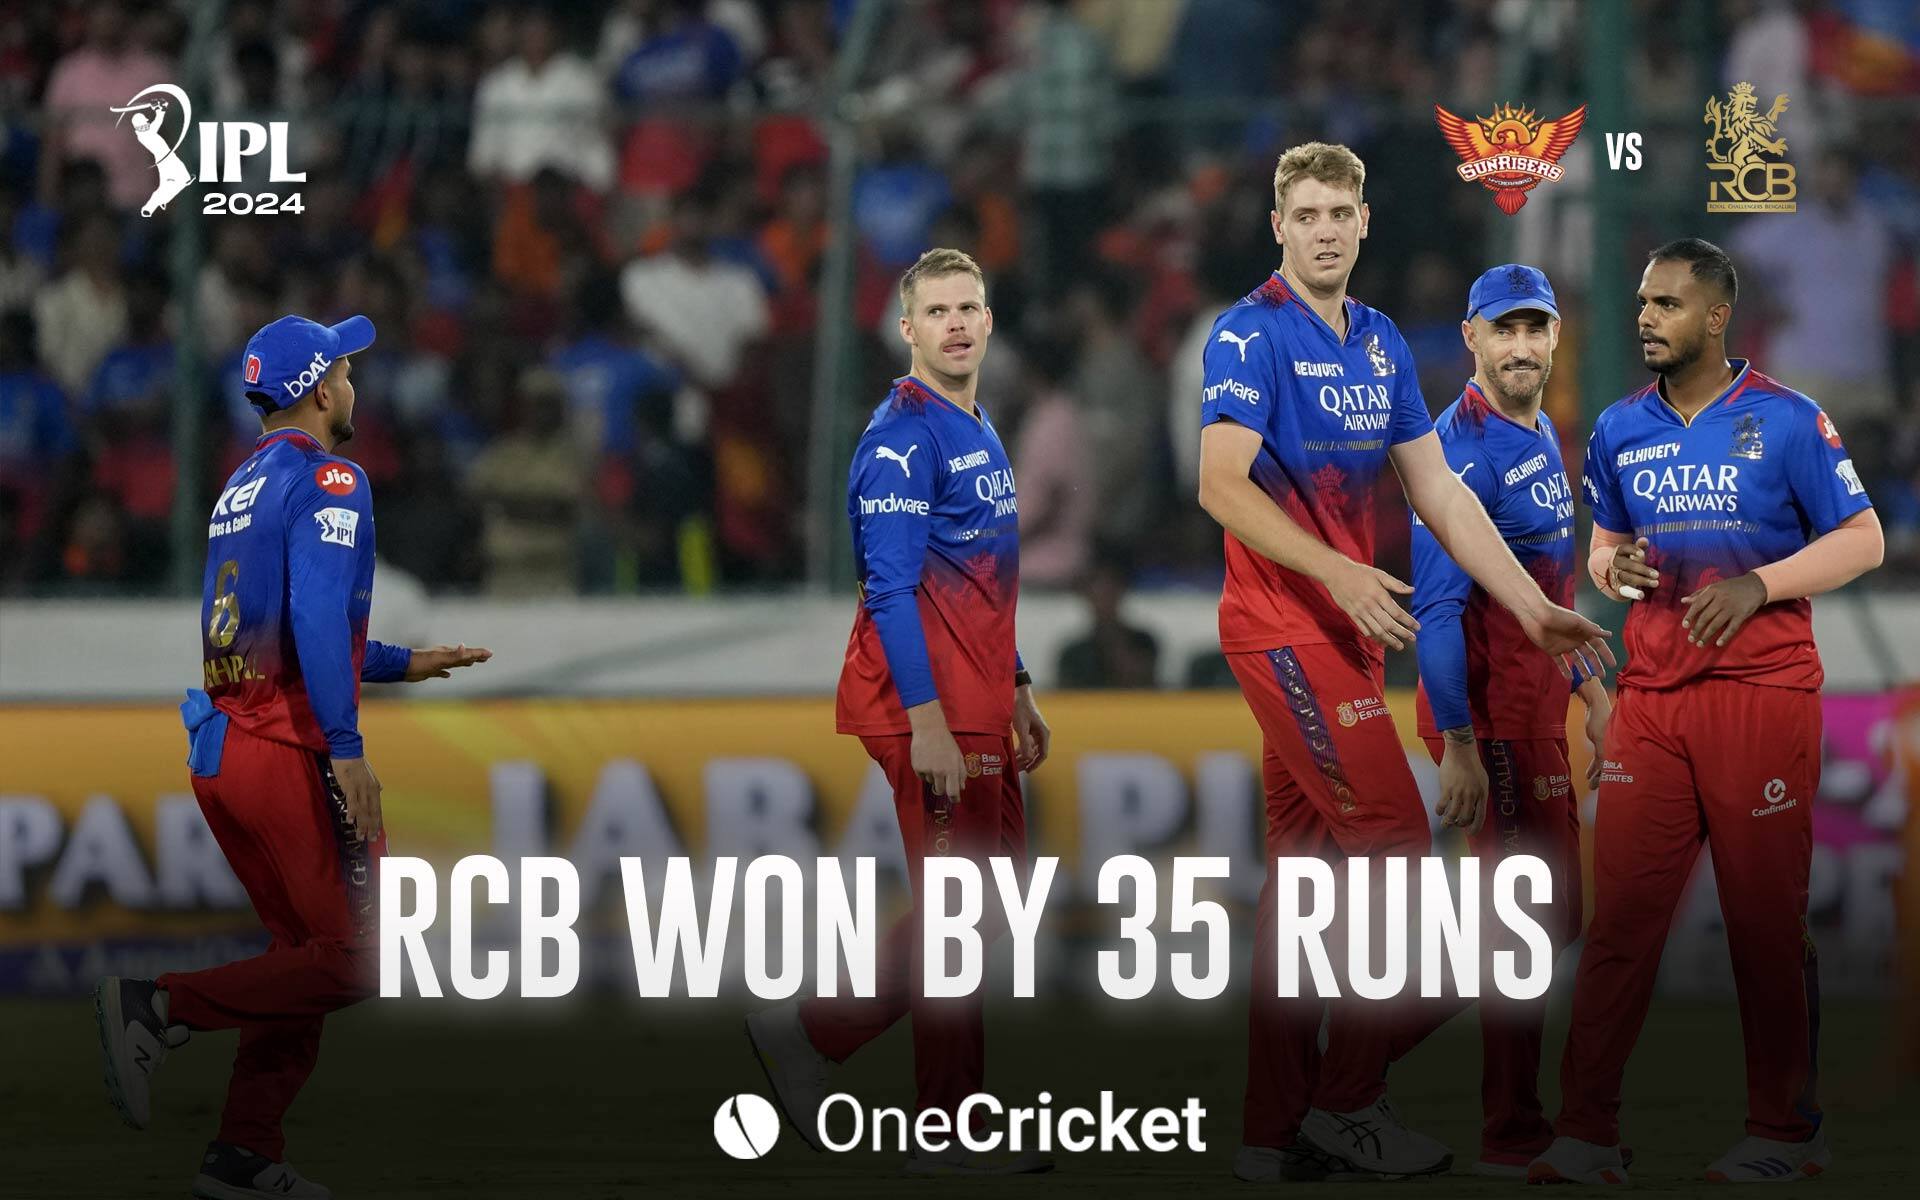 RCB win by 35 runs against SRH (OneCricket)